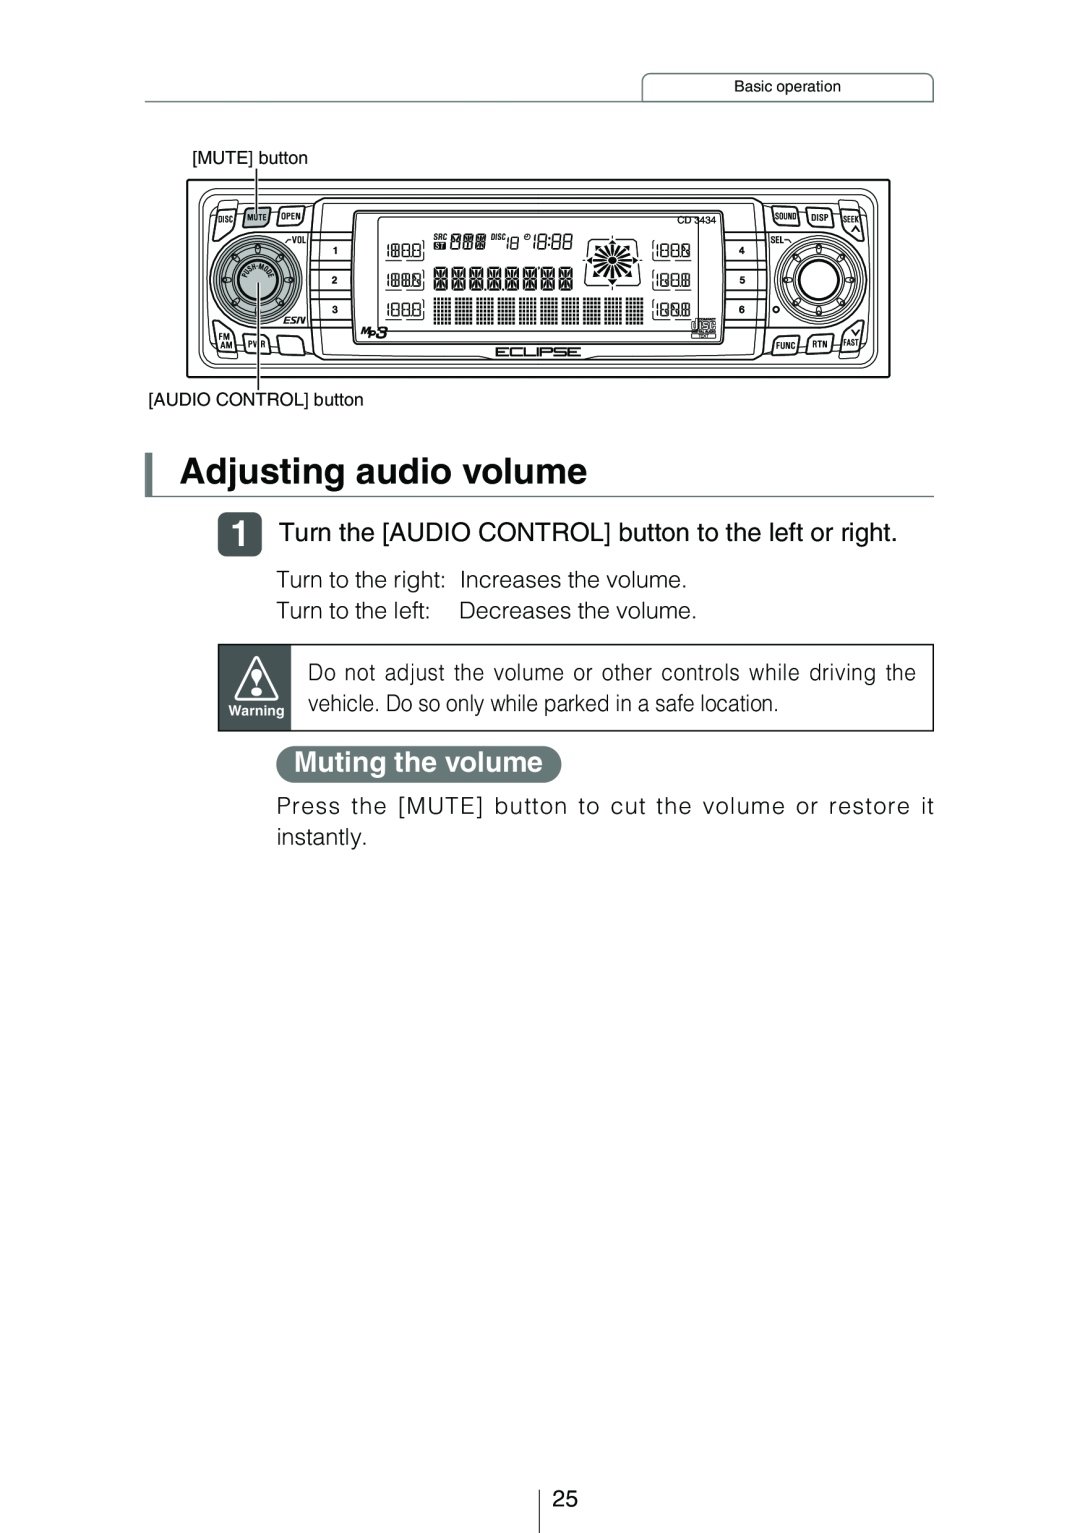 Eclipse - Fujitsu Ten CD3434 Adjusting audio volume, Muting the volume, Turn the AUDIO CONTROL button to the left or right 